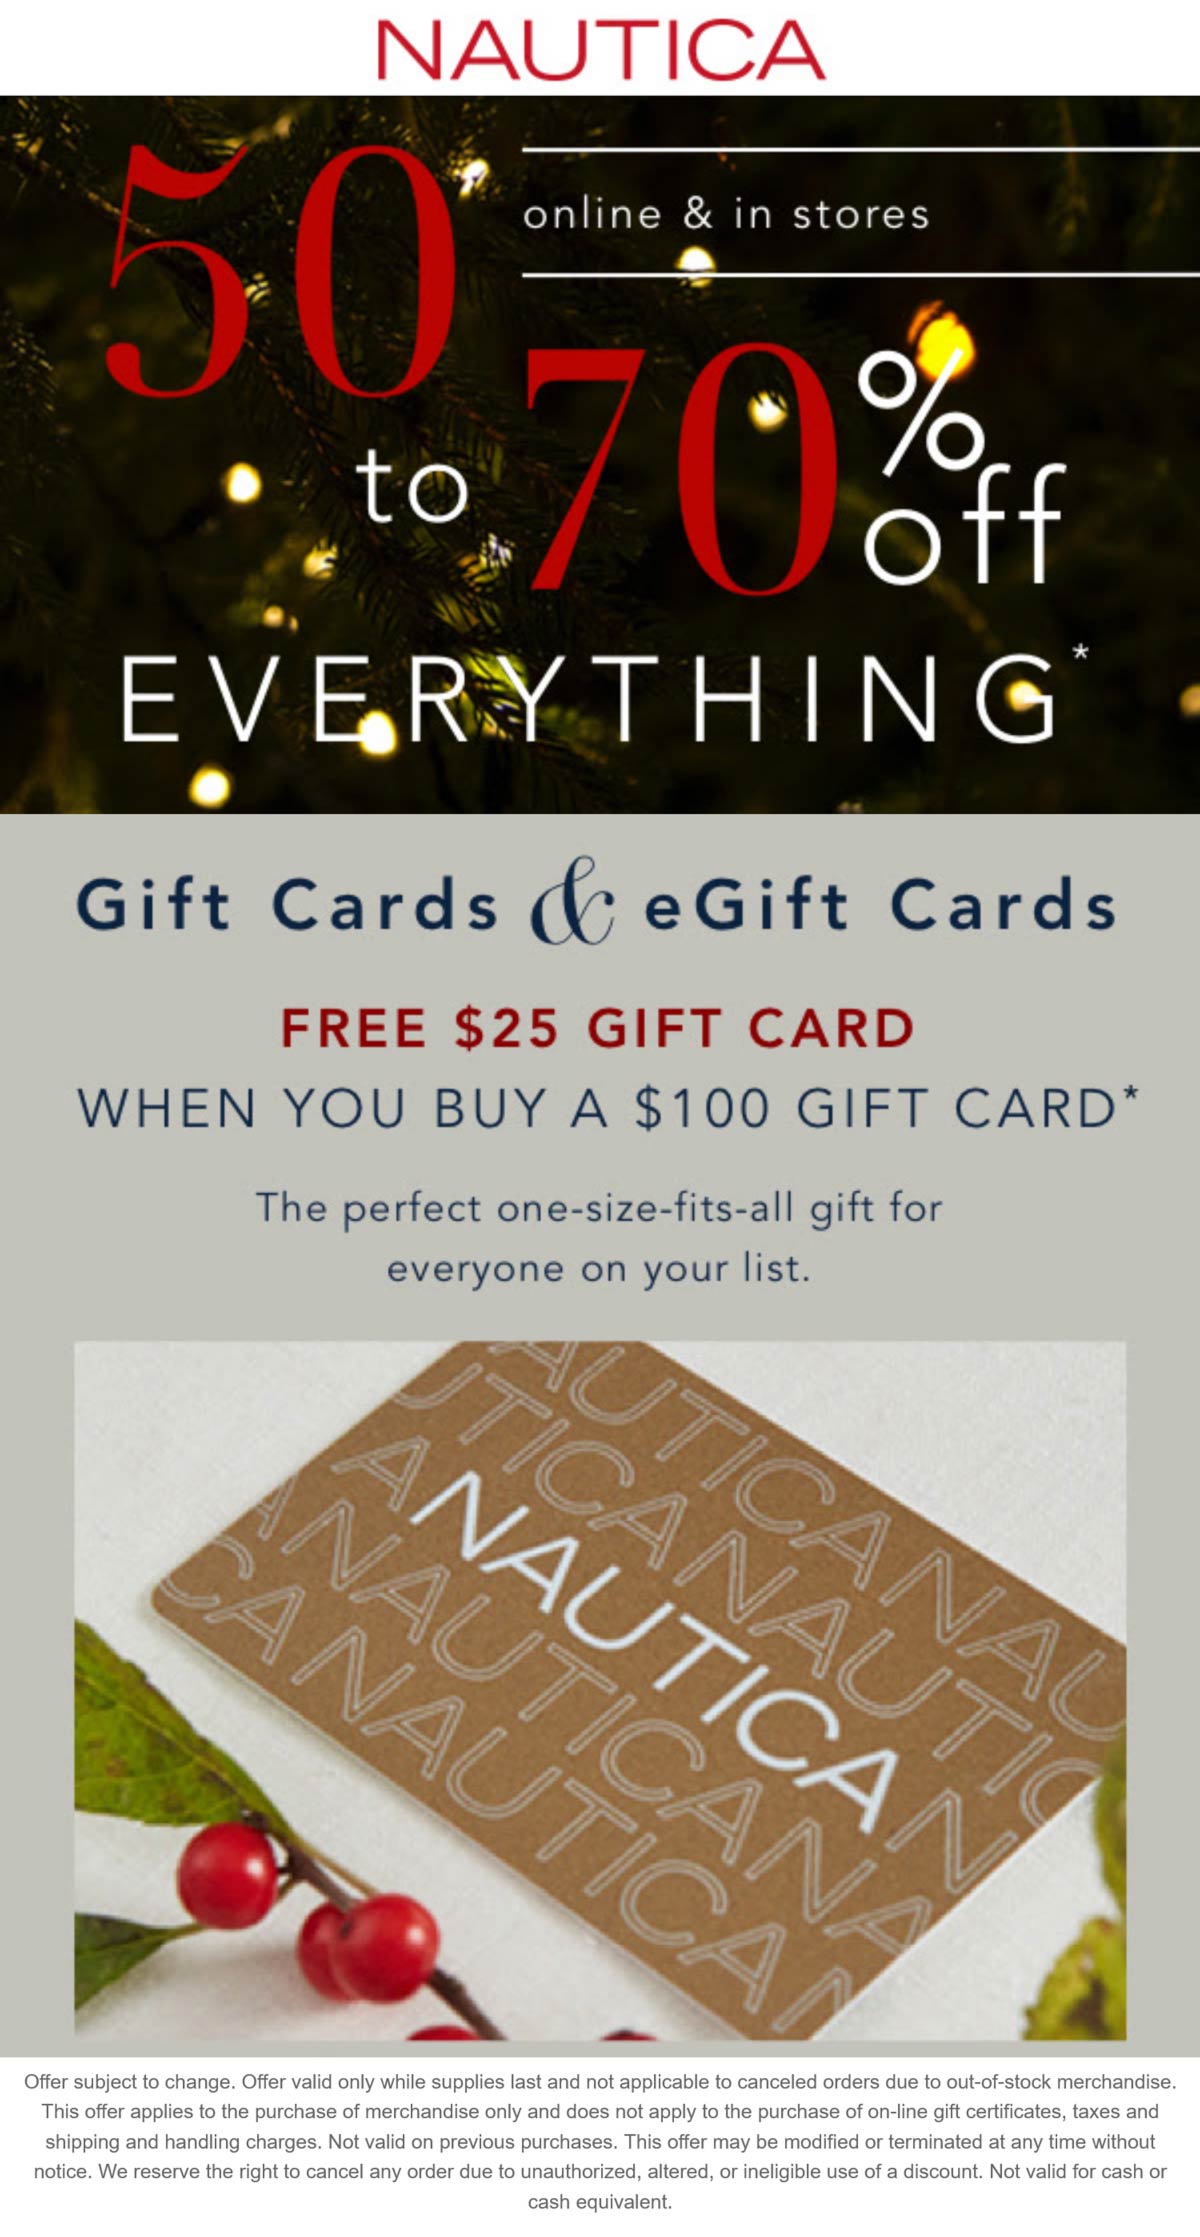 Nautica stores Coupon  50-70% off everything at Nautica, ditto online #nautica 